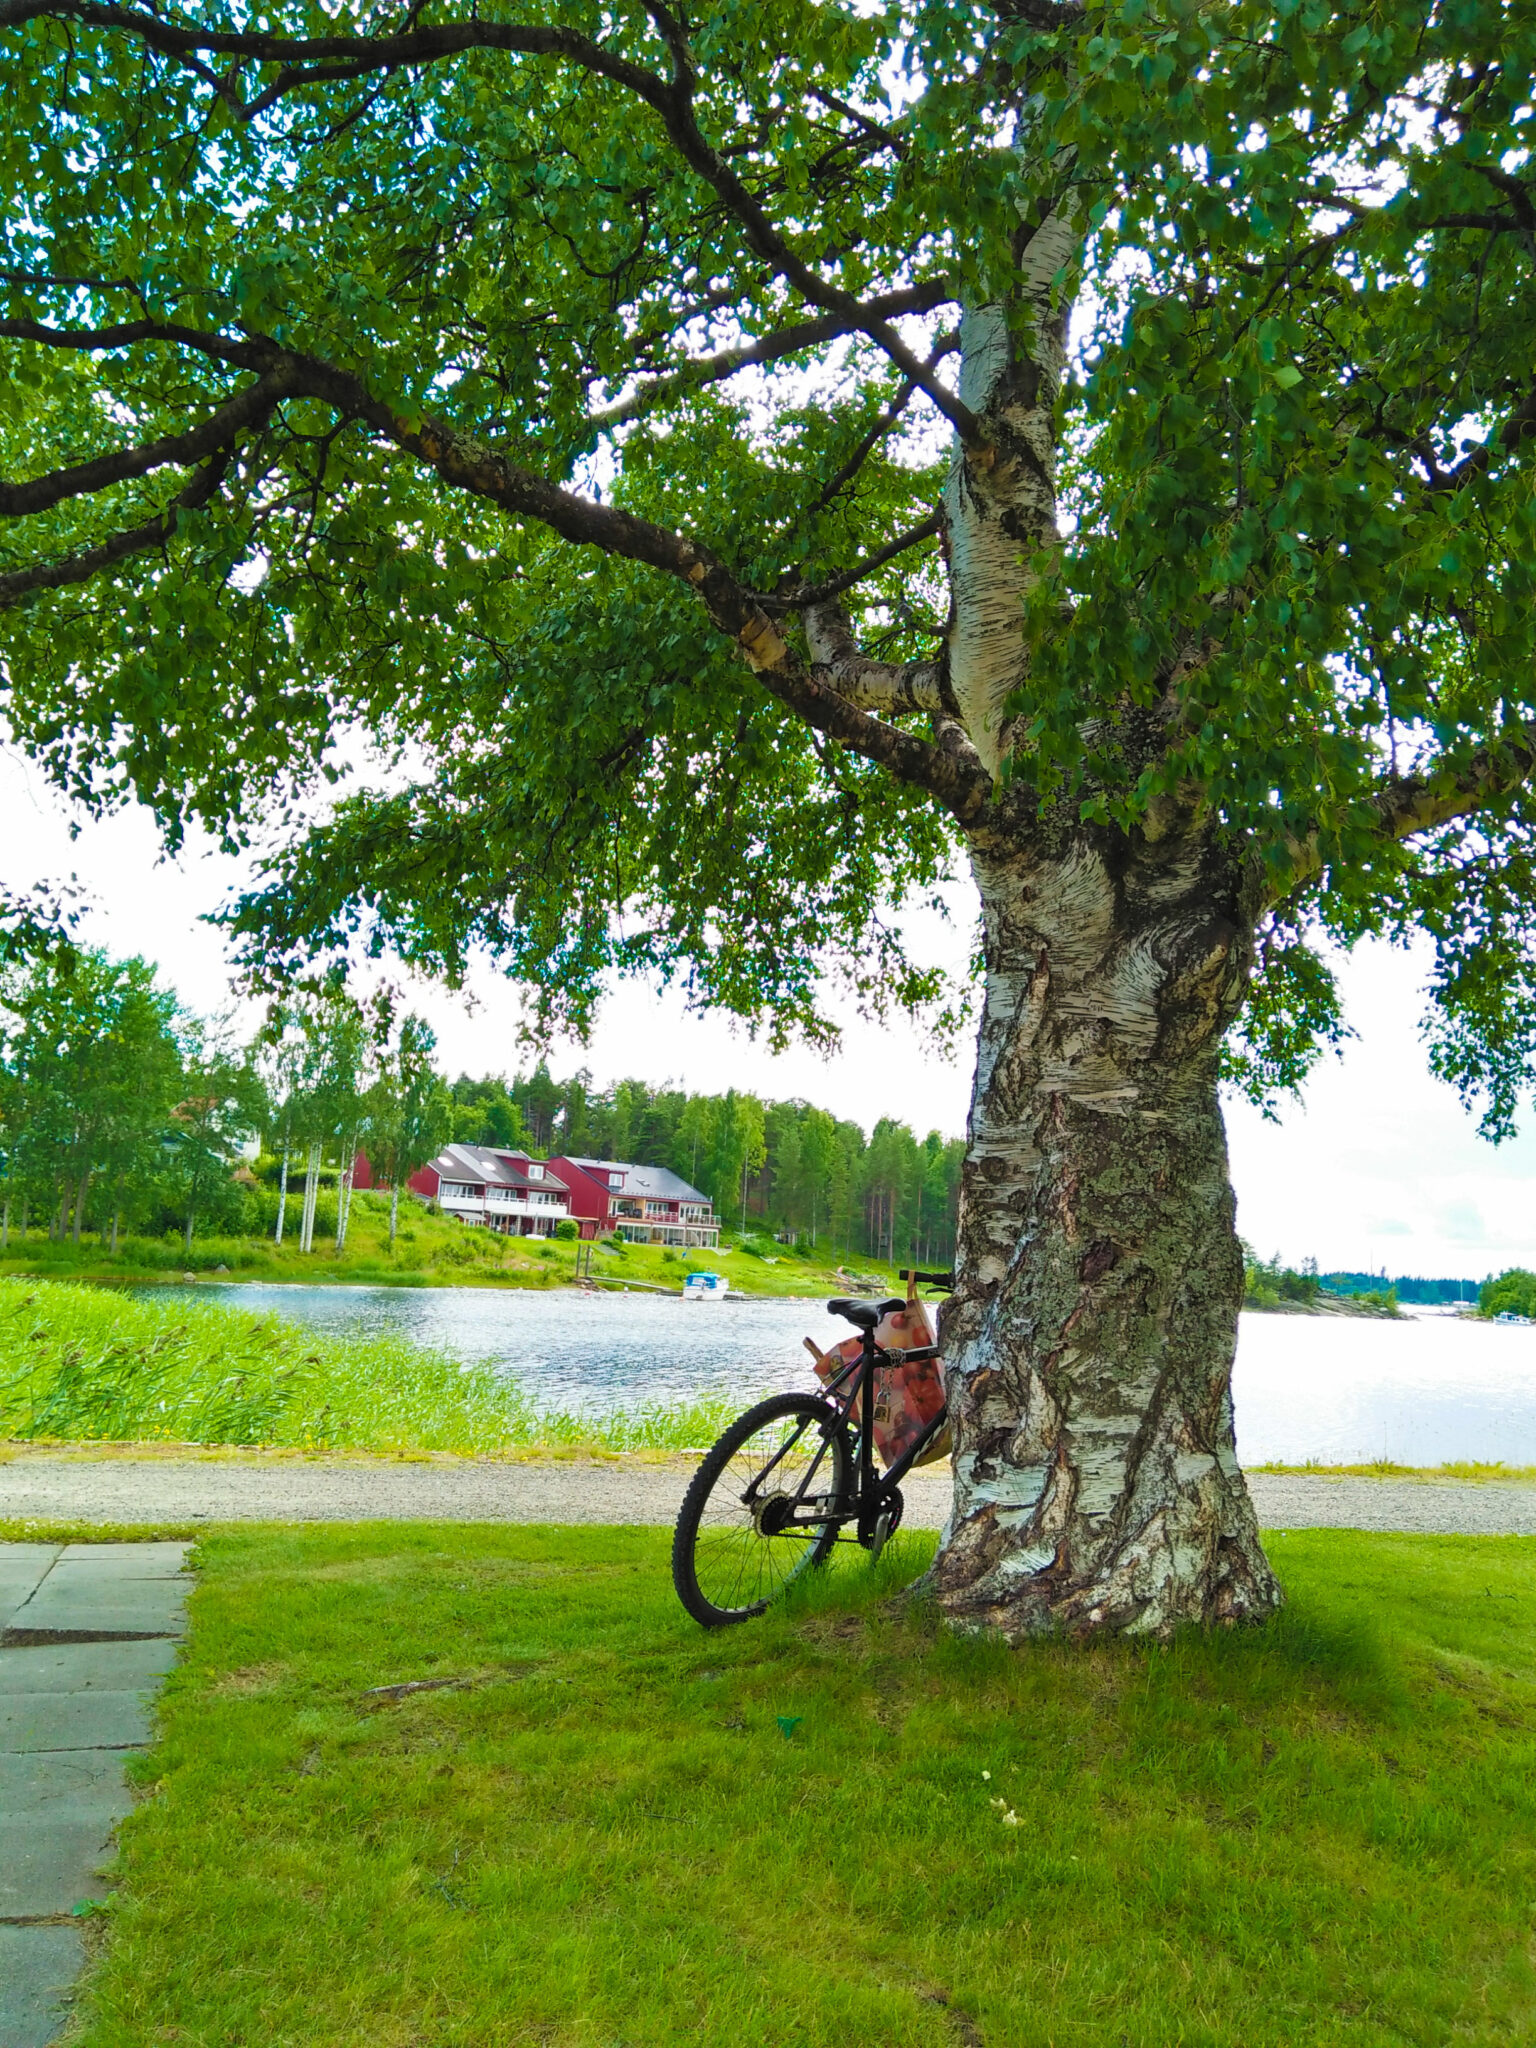 A bicycle parked under a tree near a calm lake during my shoreleave in Sweden.